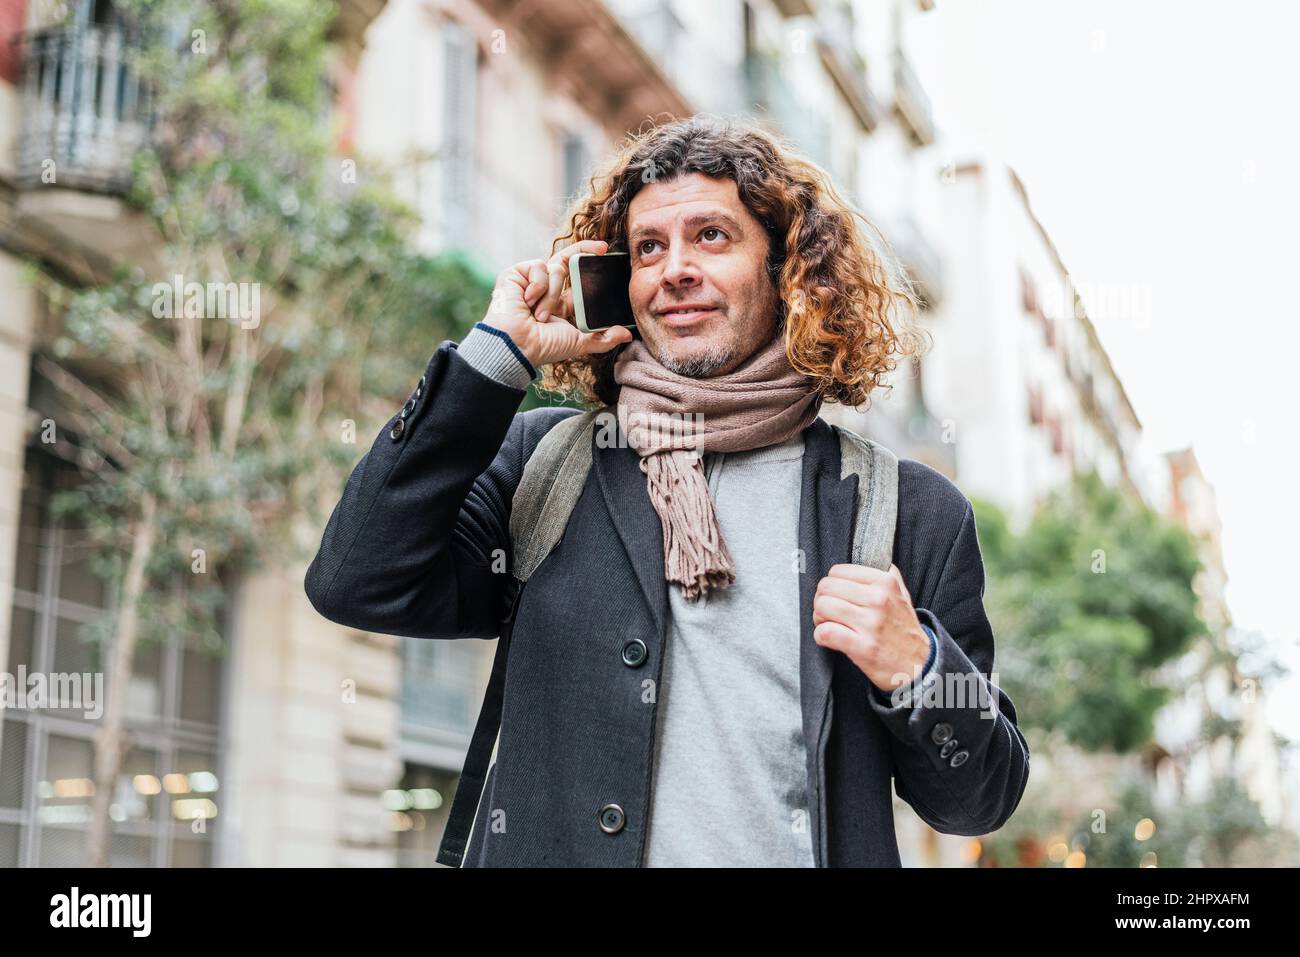 Low angle of positive mature male in smart casual clothes with backpack and scarf. He is looking away with smile and speaking on cellphone on blurred background of city street Stock Photo